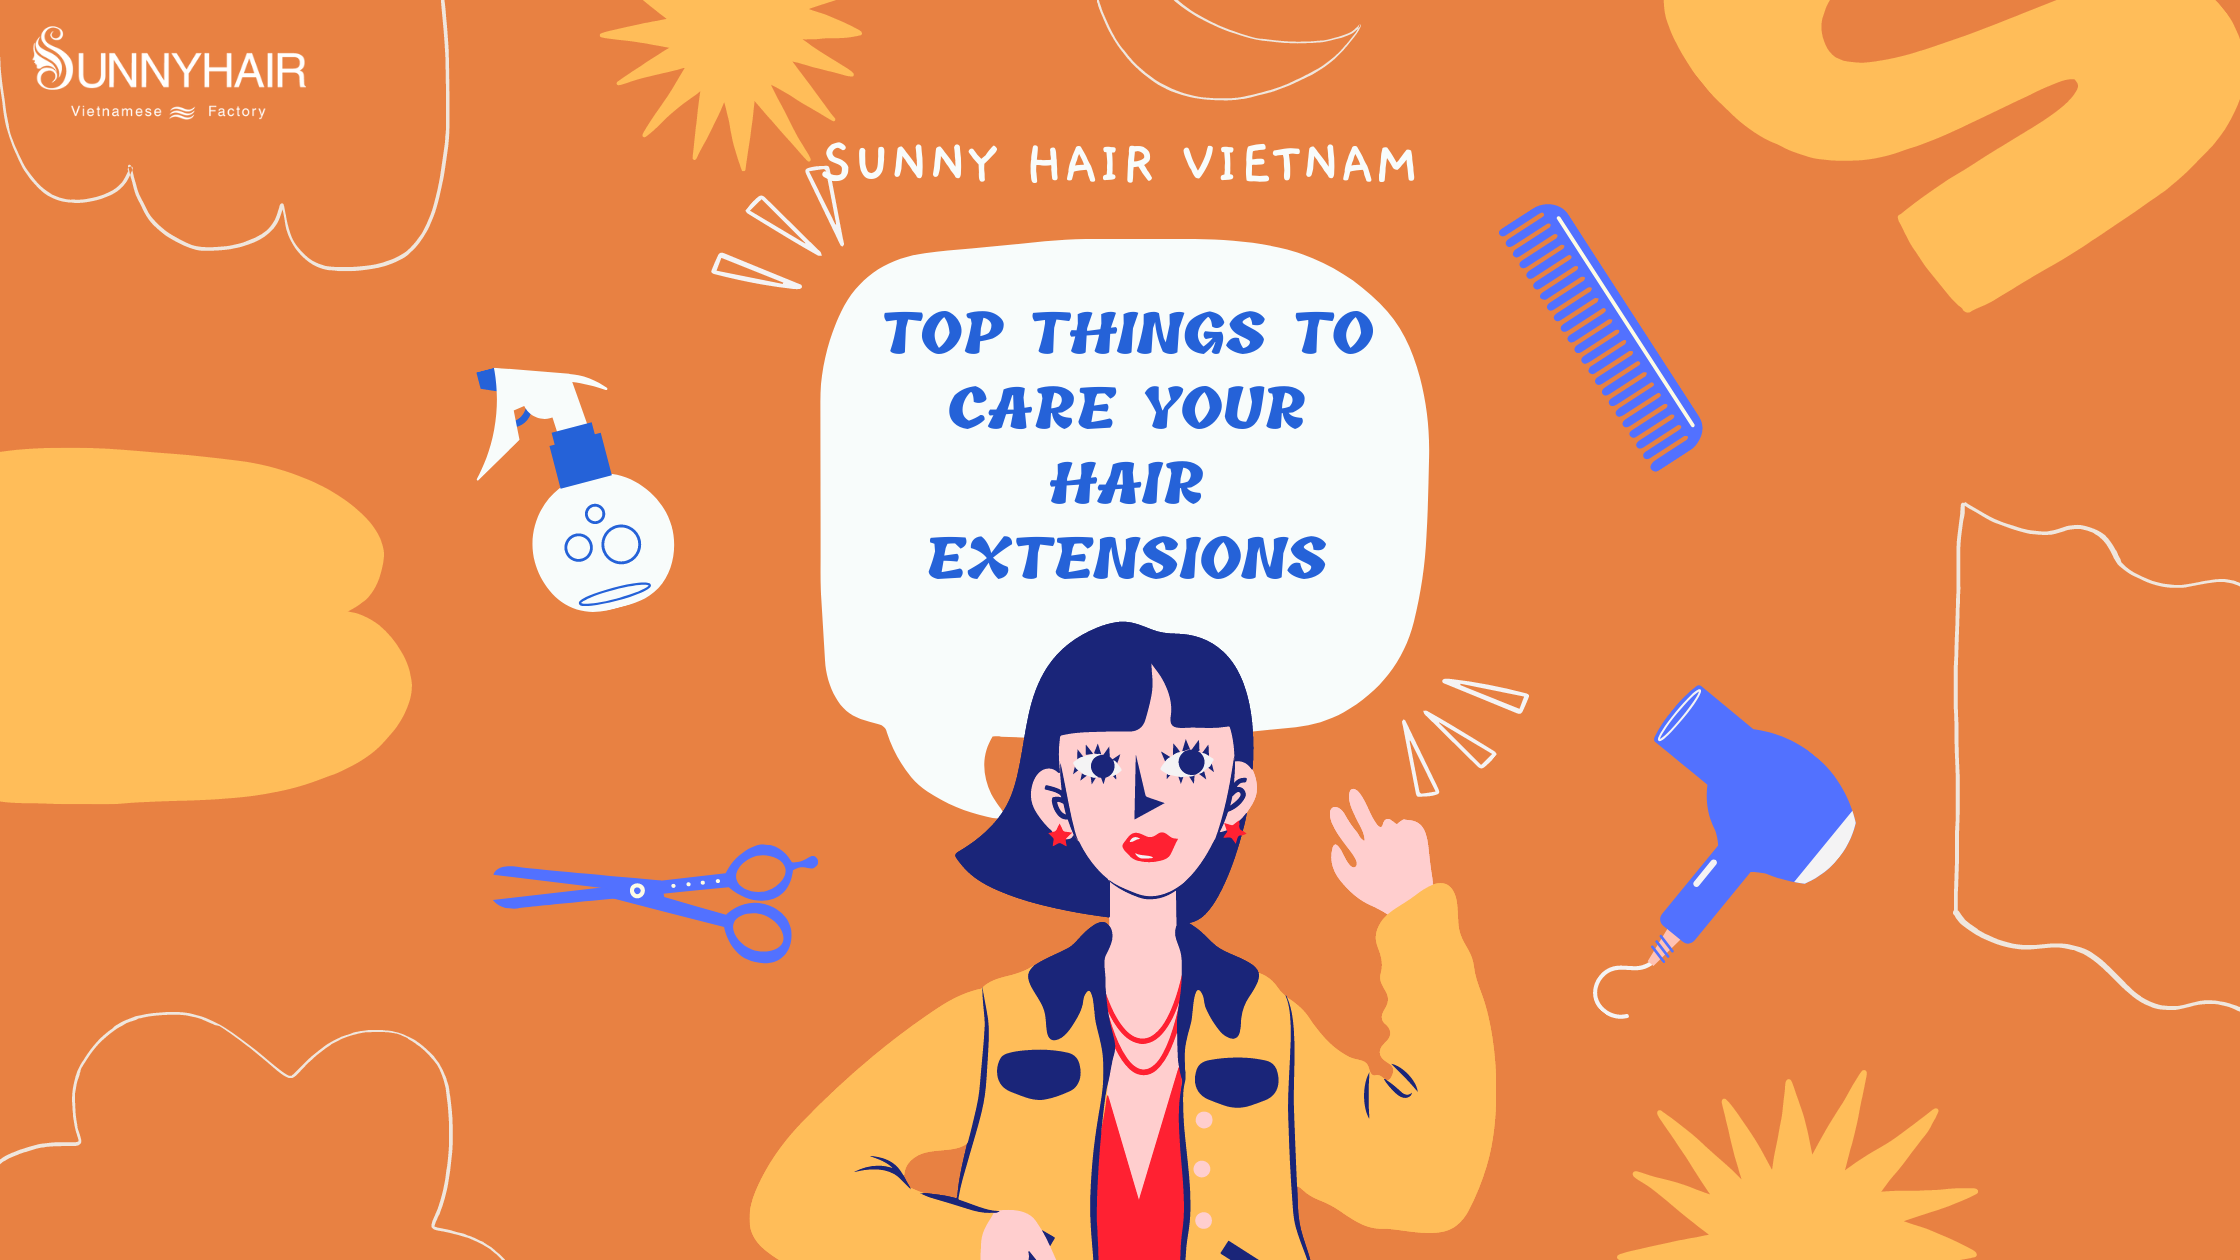 Top things to care hair extensions 